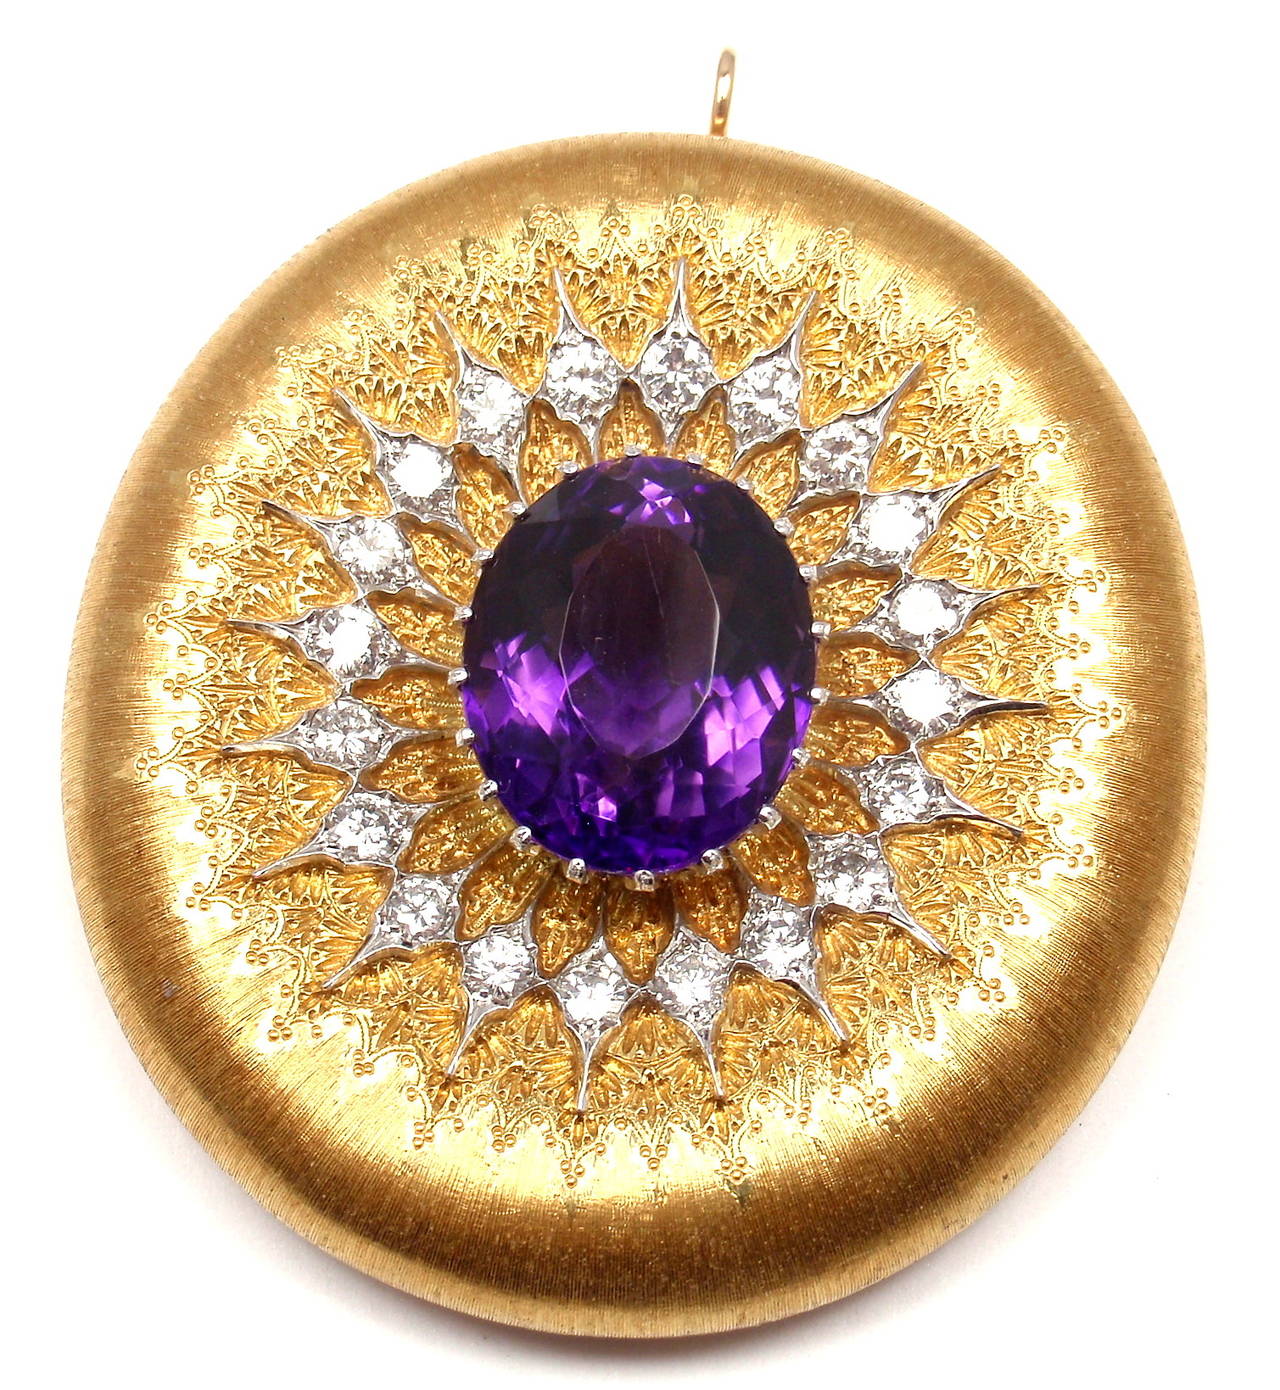 18k Yellow Gold Diamond Amethyst Large Brooch Pin by Buccellati. 
With 20 brilliant cut diamonds VS1 clarity, G color total weight approx. 1.20ct
1 large amethyst approx. 13ct

Details: 
Weight: 26 grams
Measurements:  2